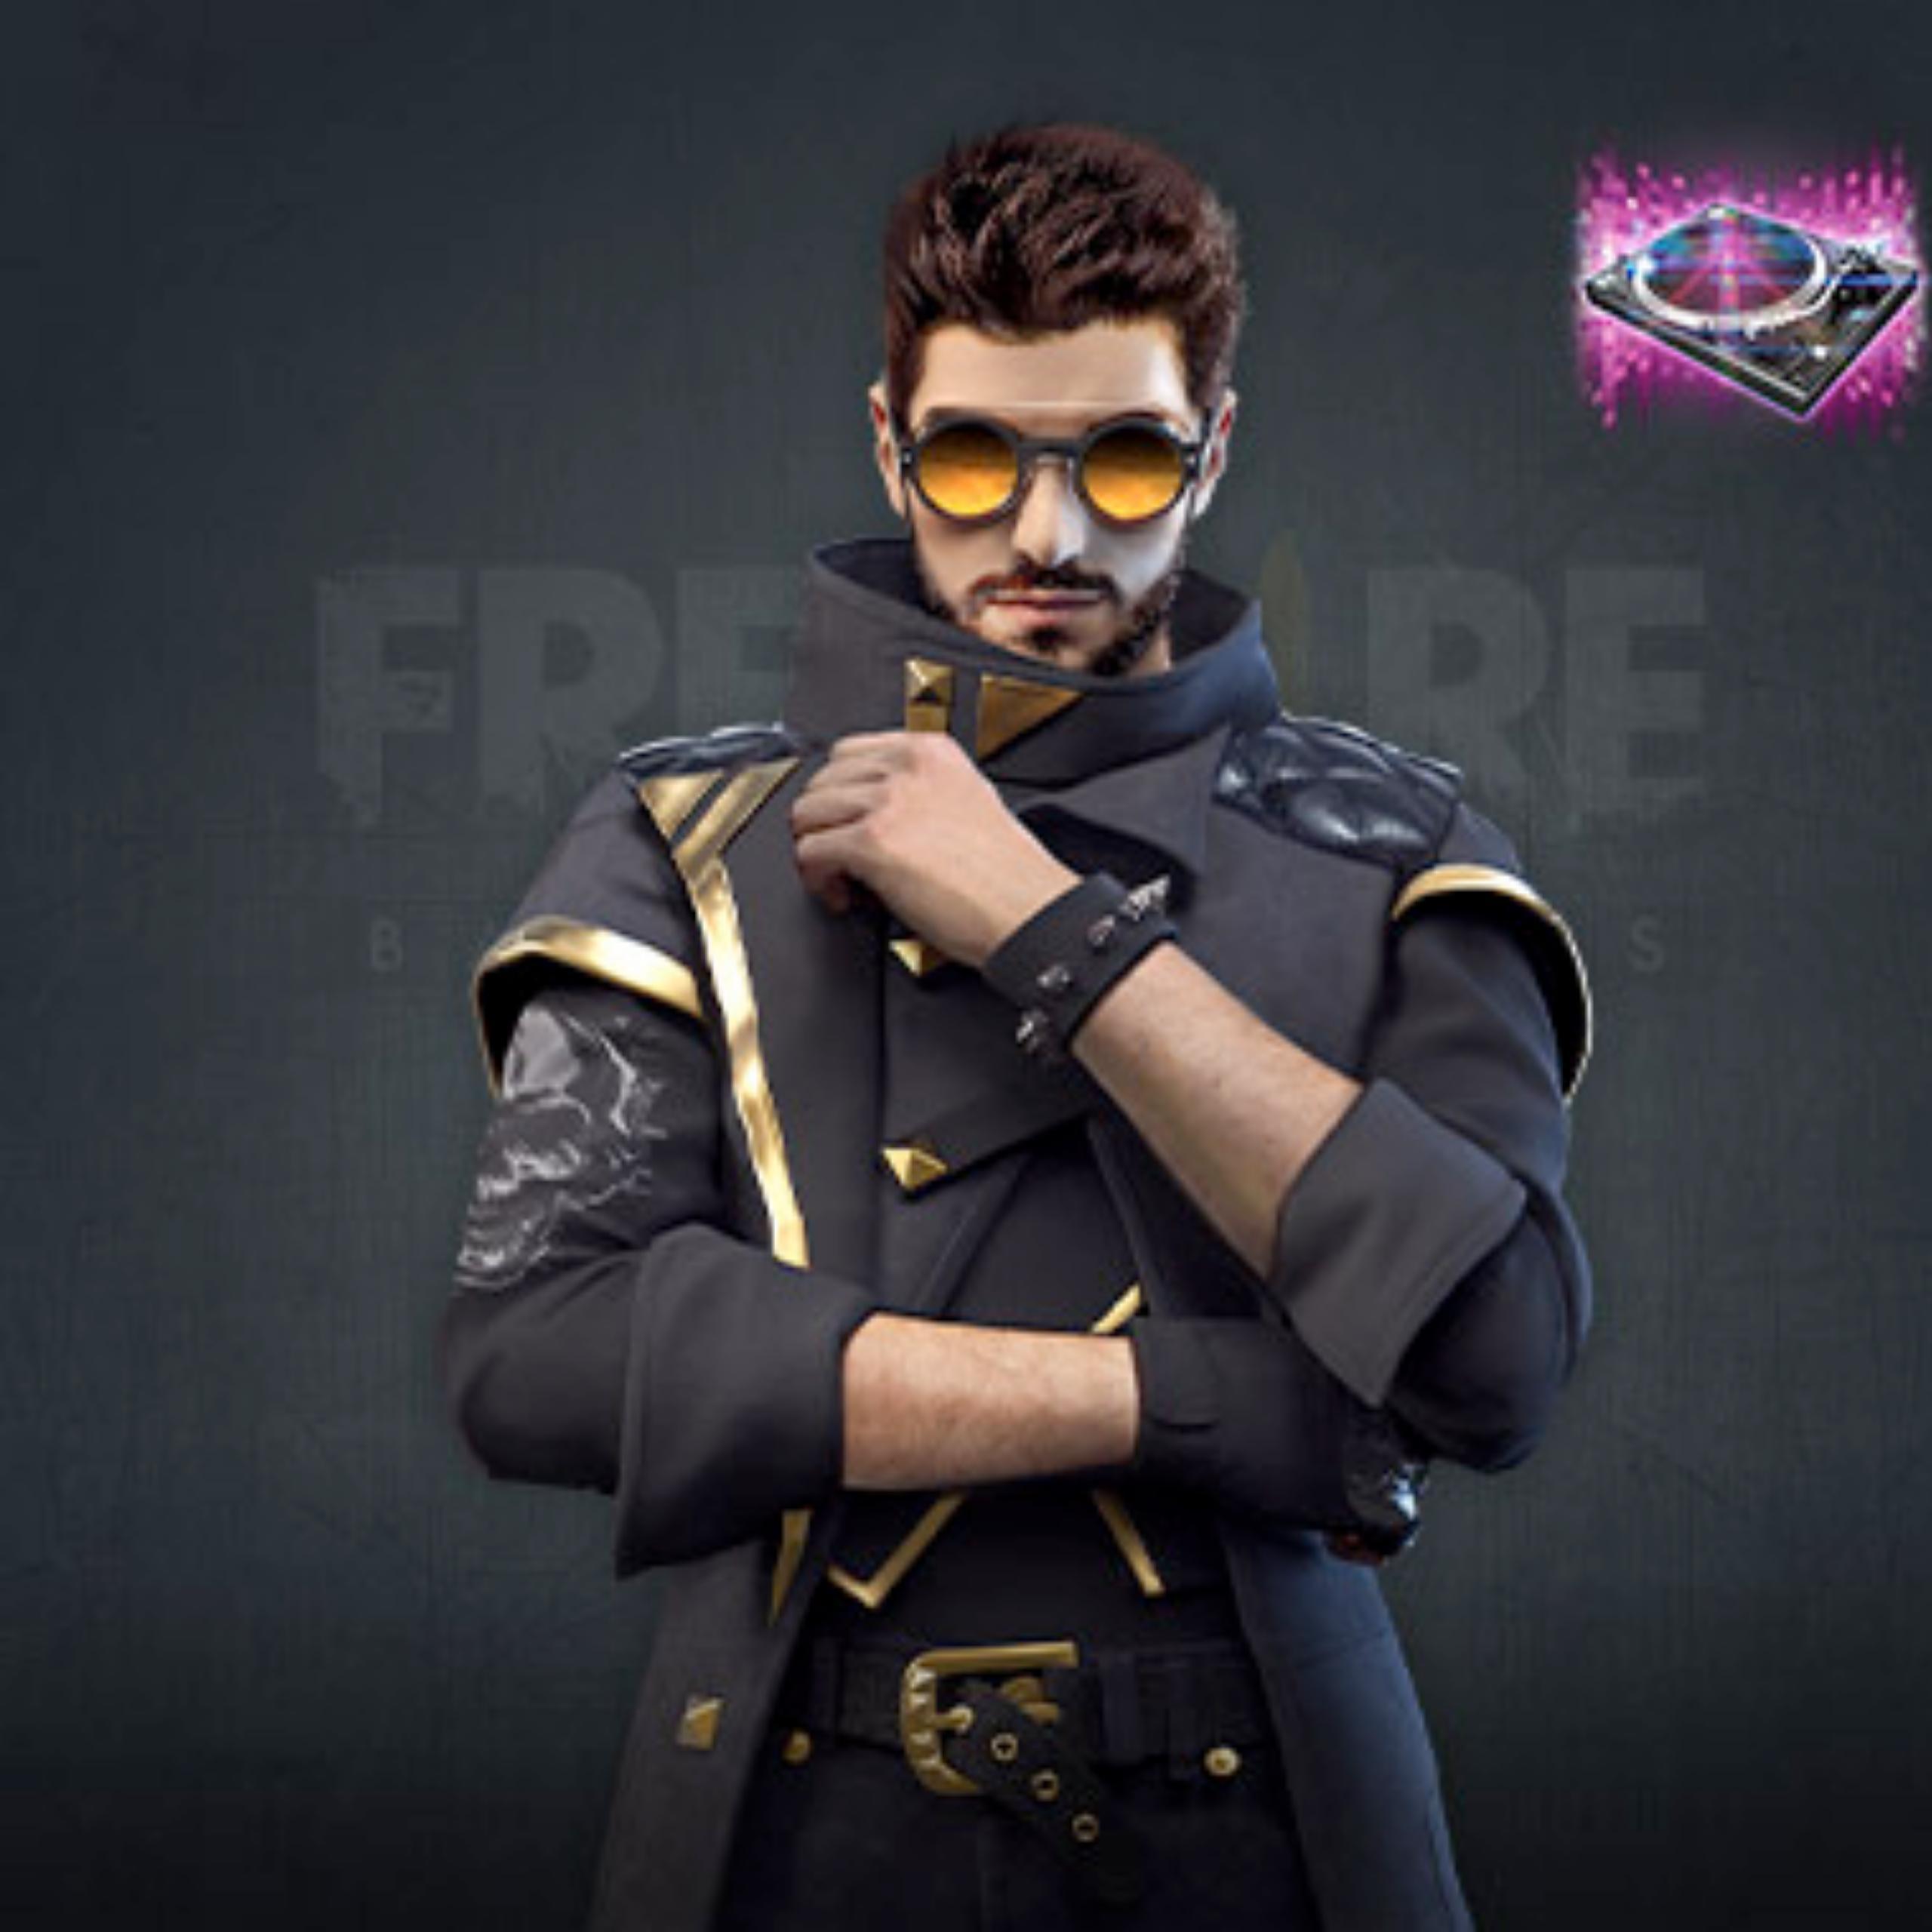 Bundle Free Fire Png Alok Free Fire Alok Character Png Image With Transparent Background For Free Amp Unlimited Download In Hd Quality